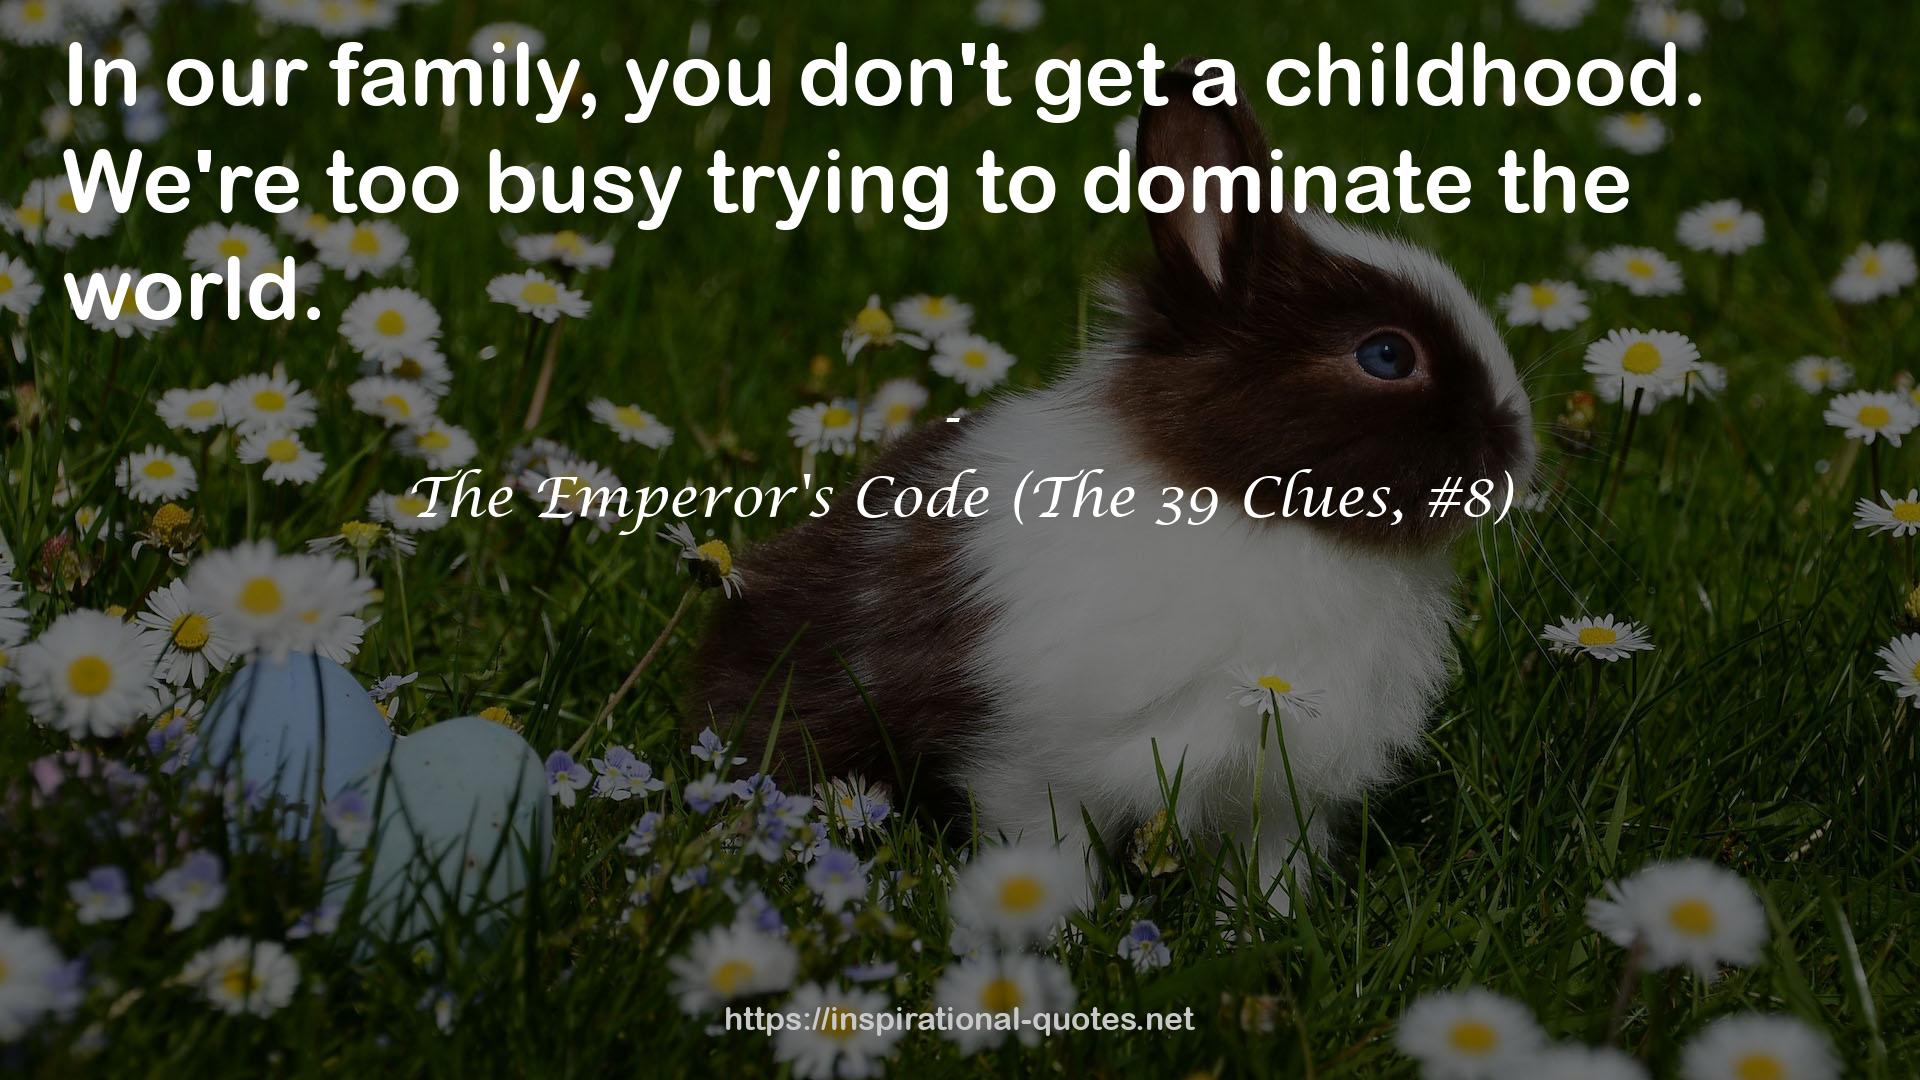 The Emperor's Code (The 39 Clues, #8) QUOTES